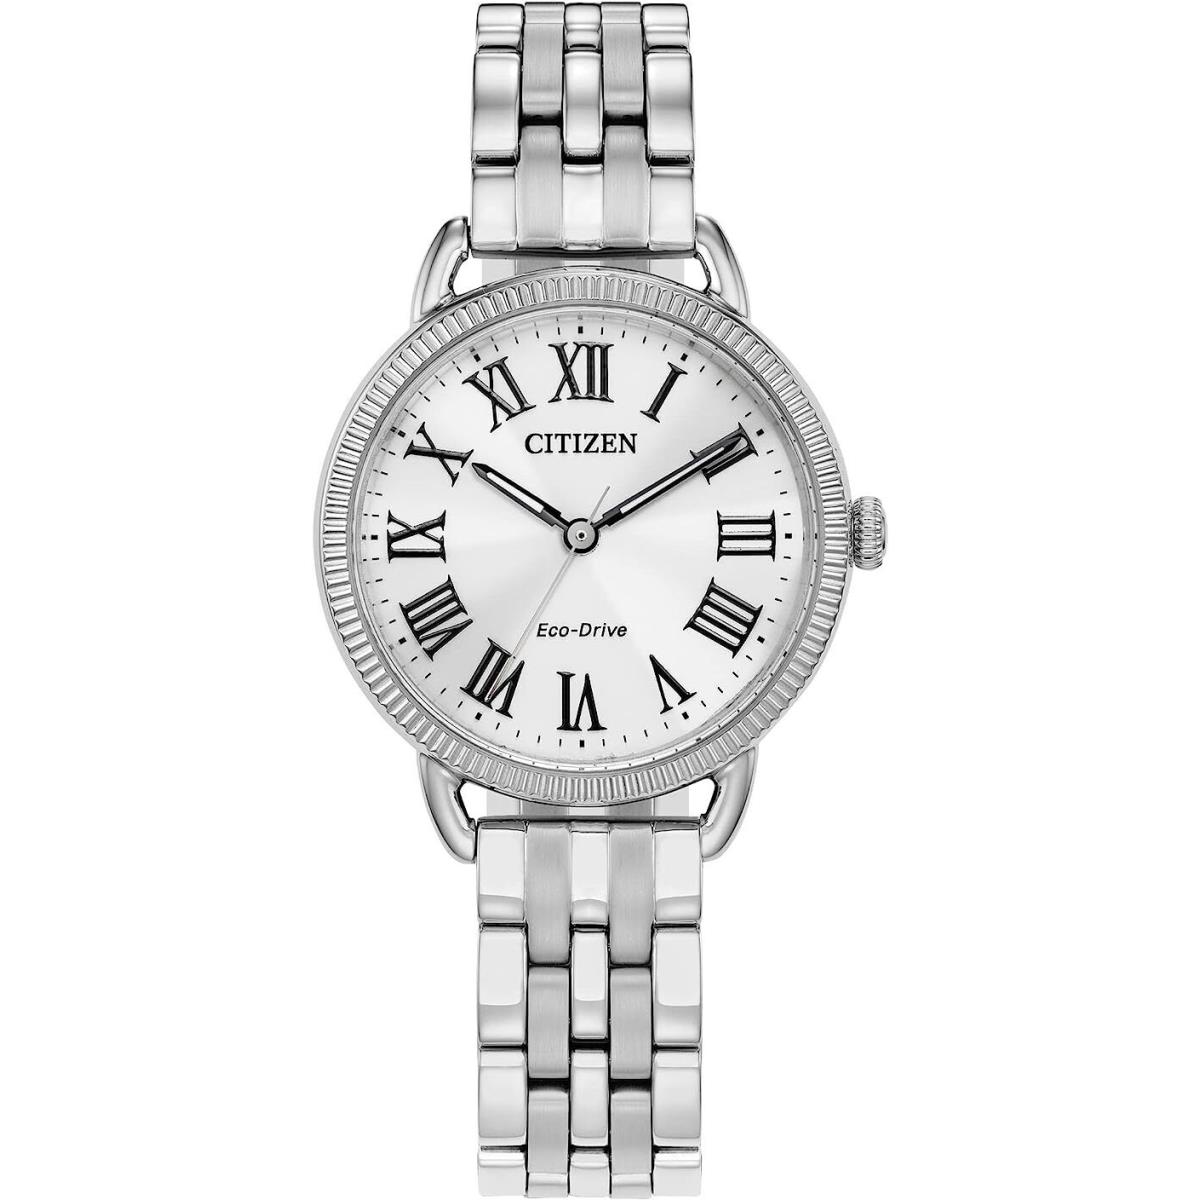 Citizen Women`s Classic Coin Edge Eco-drive Silver Dial 29mm Watch EM1050-56A - Silver Dial, Silver-Tone Band, Silver Bezel